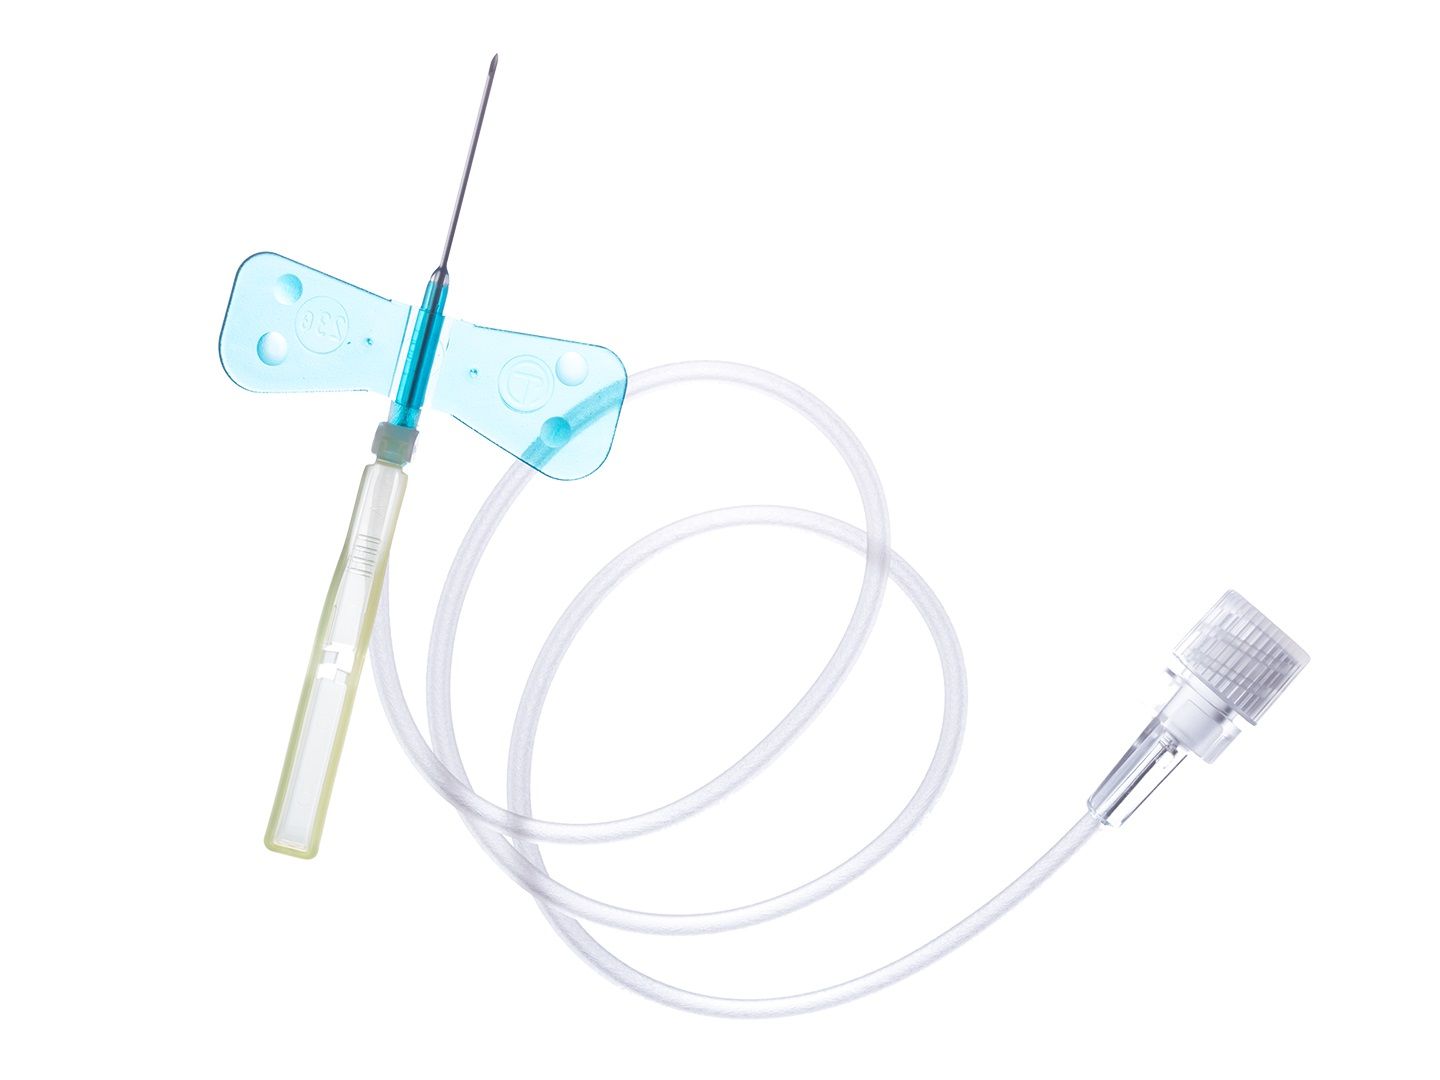 Butterfly Needles - Sureflo Winged Infusion Set